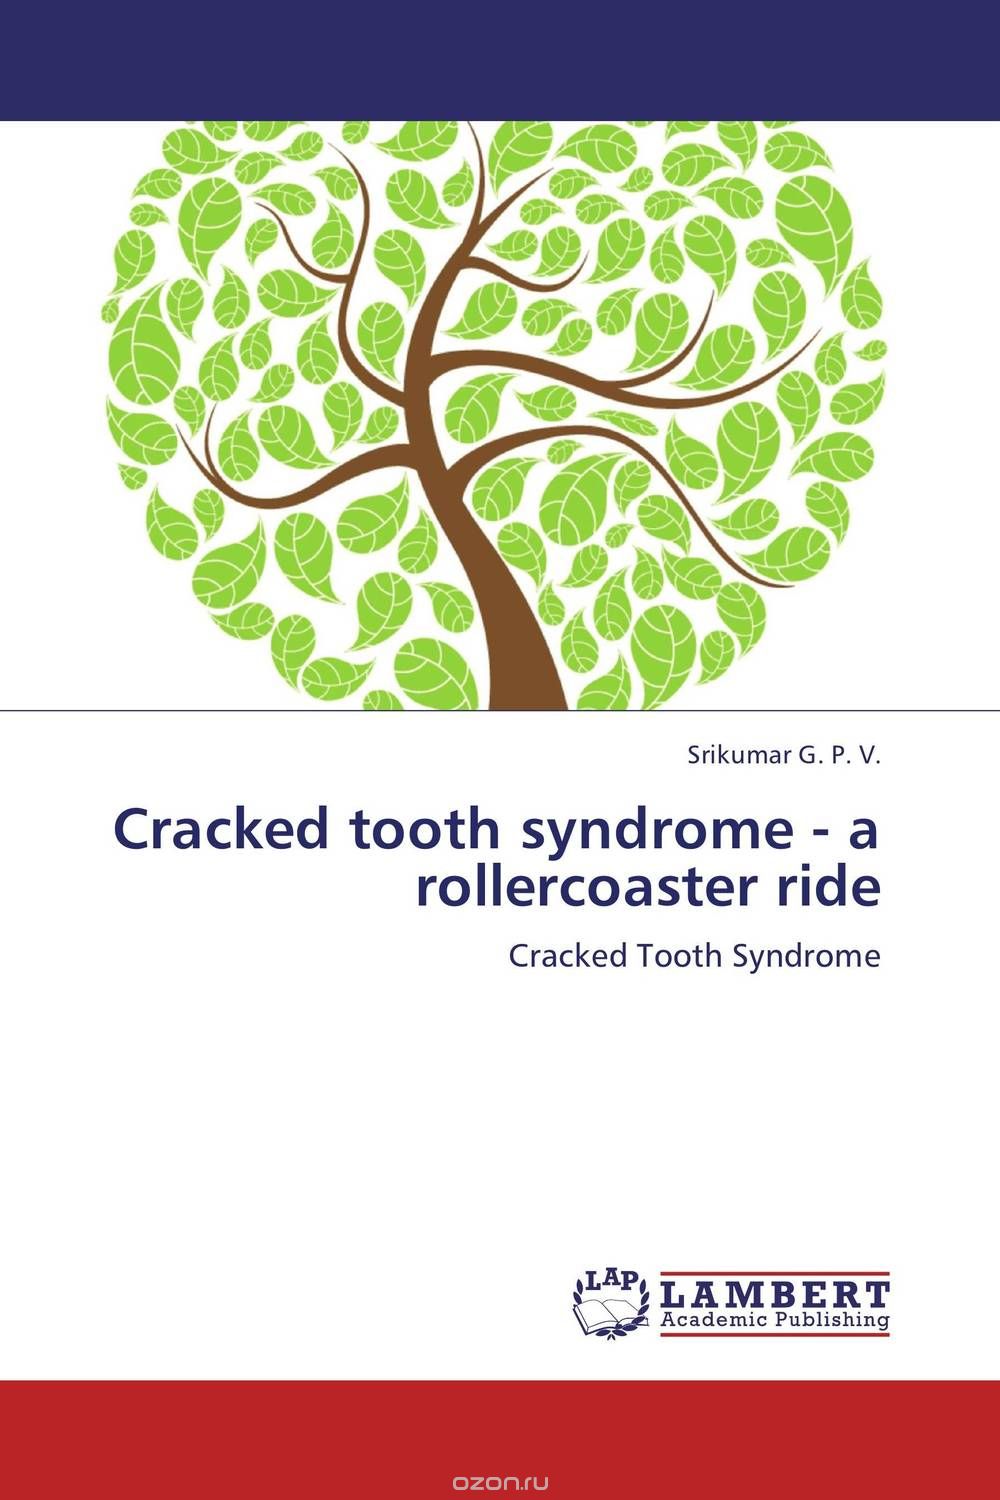 Скачать книгу "Cracked tooth syndrome - a rollercoaster ride"